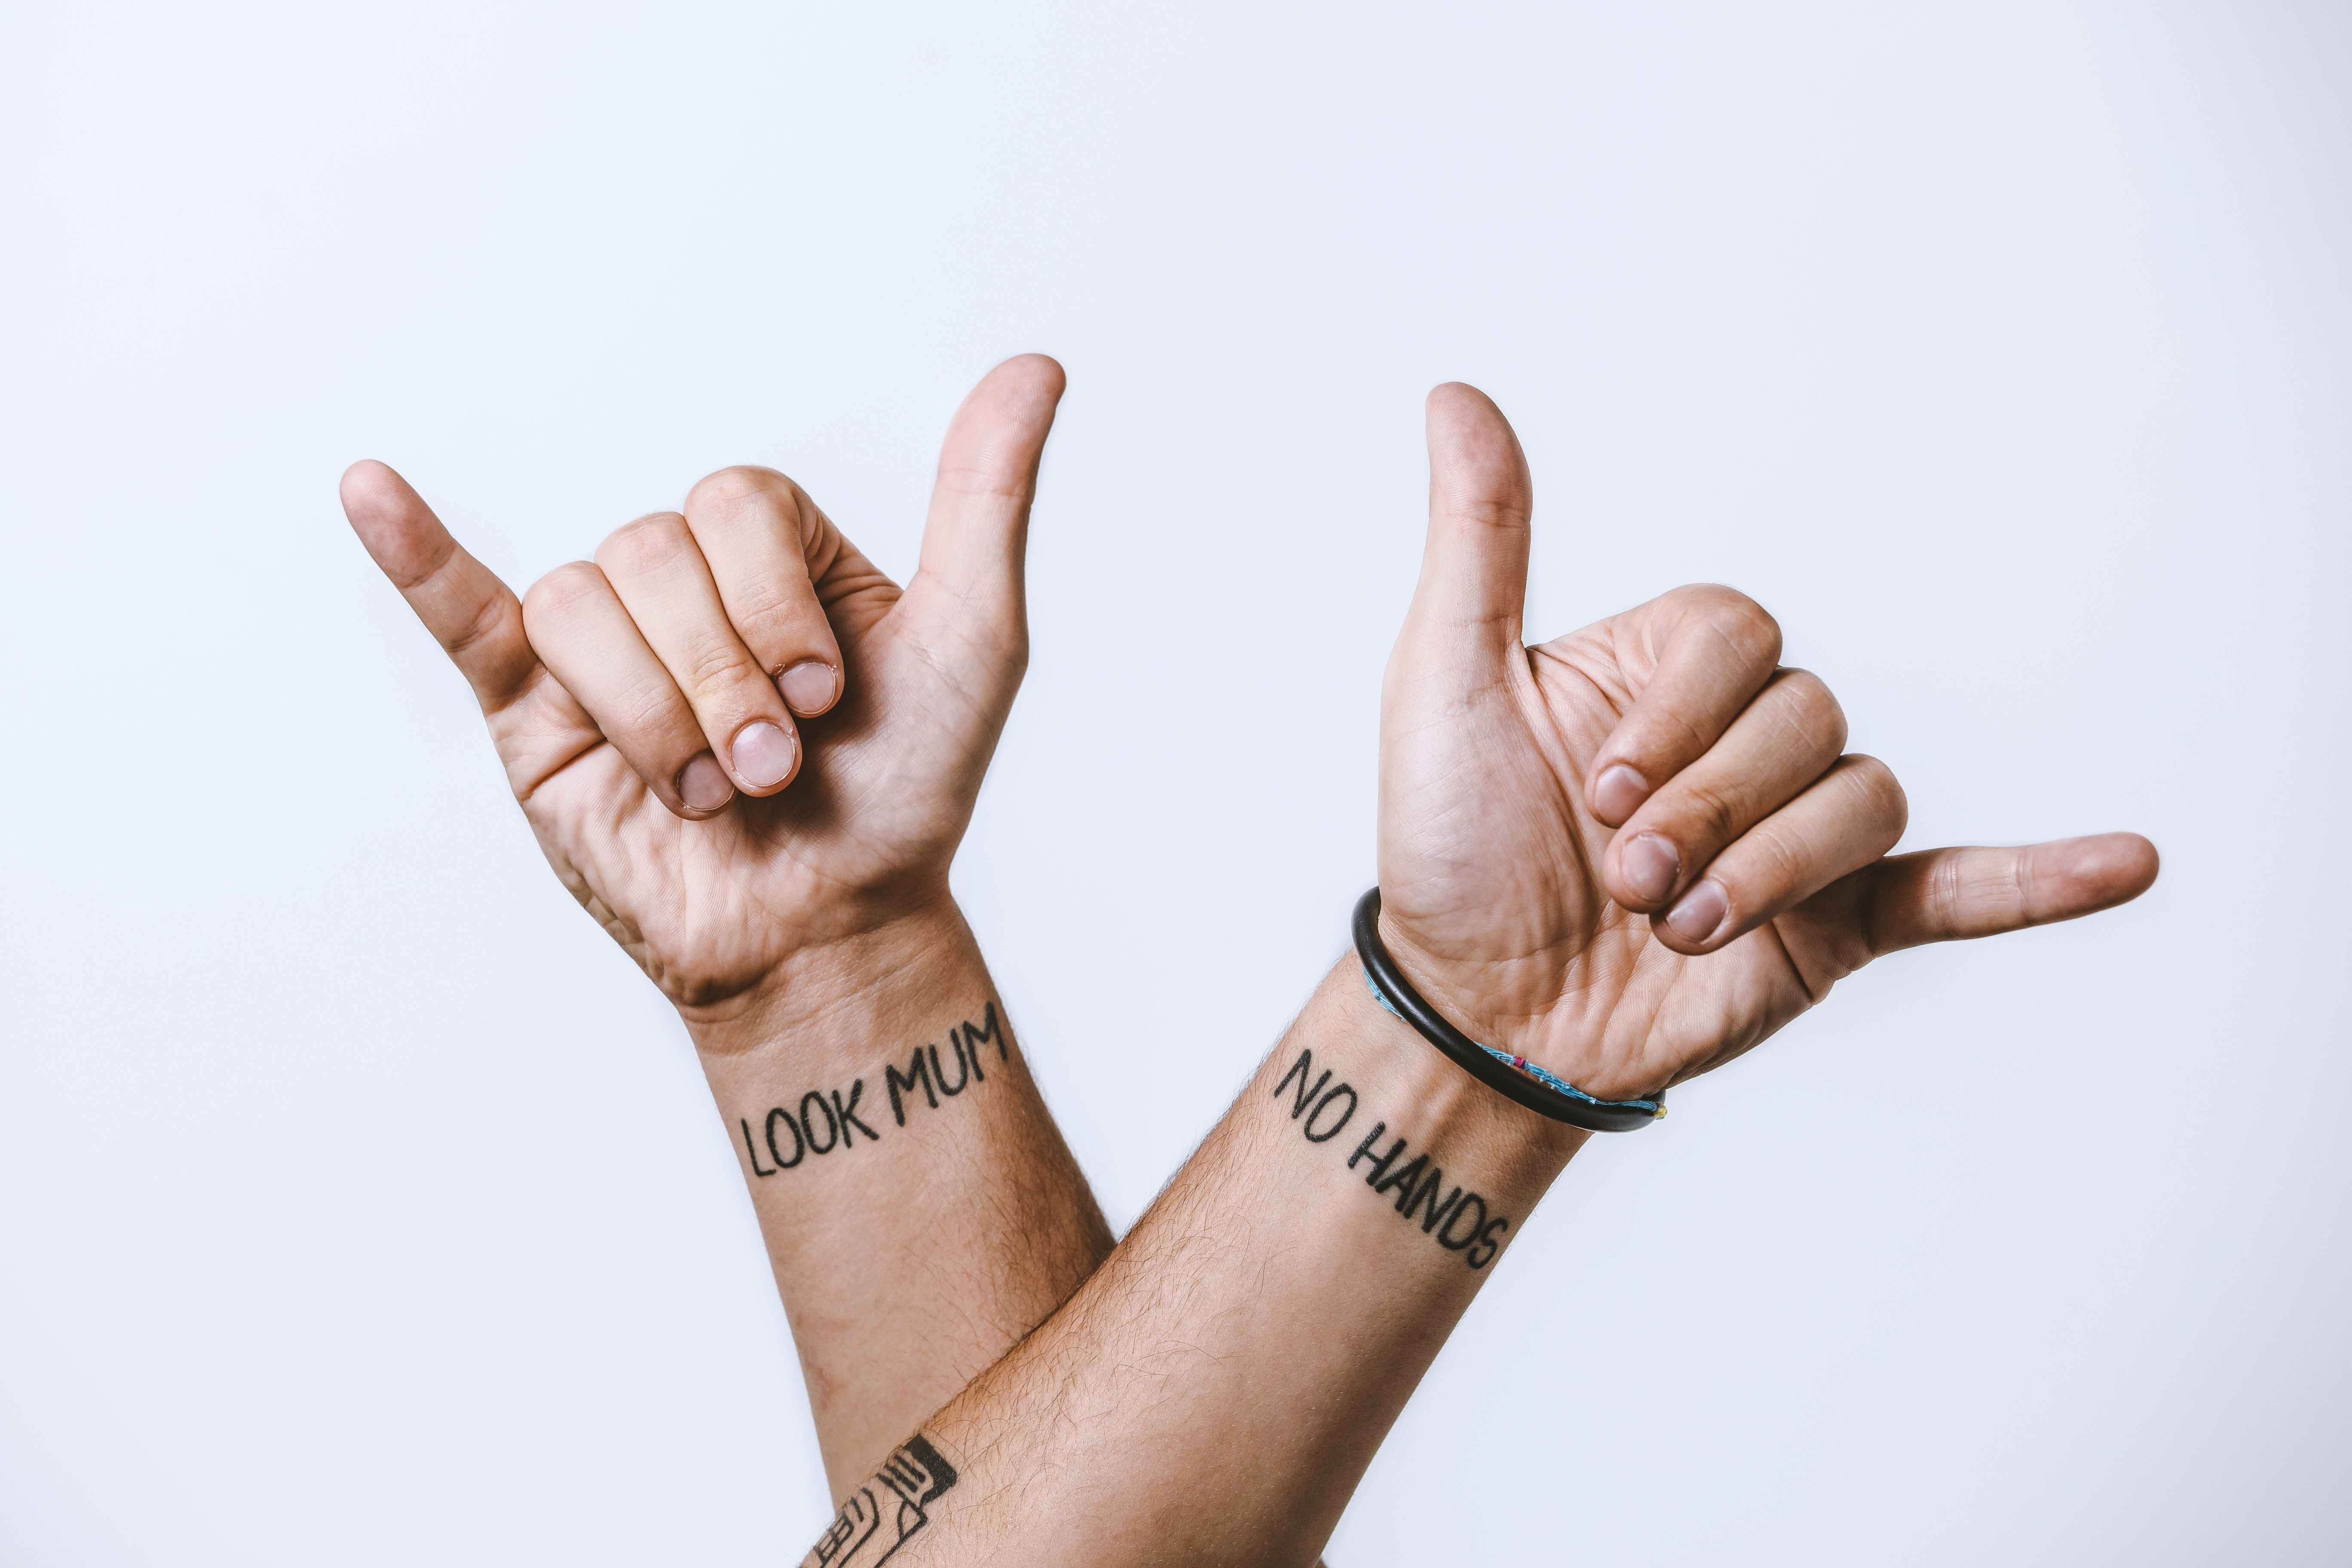 Crop tattooed man hands showing hang loose gesture with fingers · Free